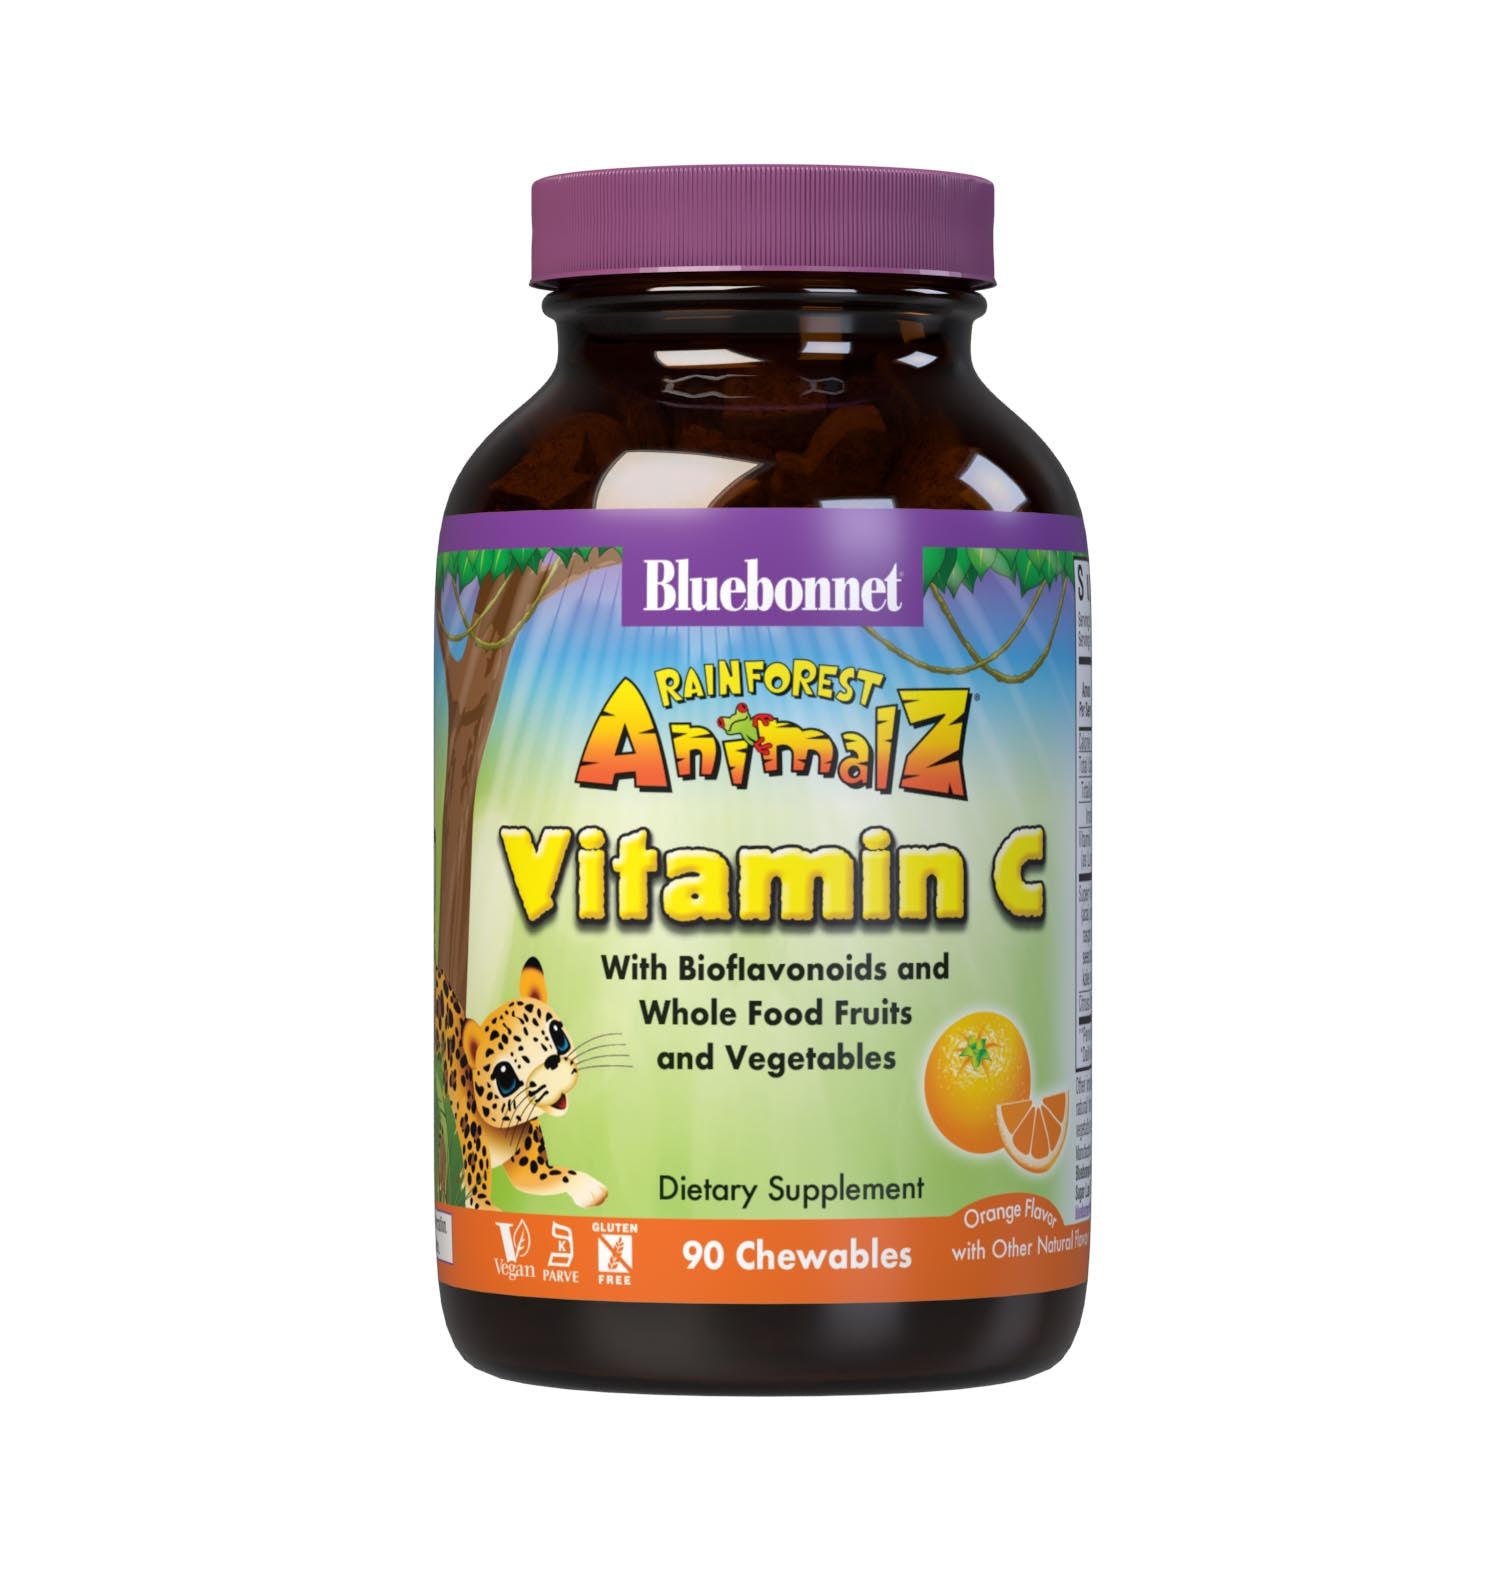 Bluebonnet Rainforest Animalz Vitamin C helps bridge the nutrient gap often found in children's diets with a buffered form of vitamin C from calcium ascorbate as well as L-ascorbic acid in a base of bioflavonoids, super fruits and vegetables to support immune health. All this in just two yummy animal-shaped chewables per serving. #size_90 count